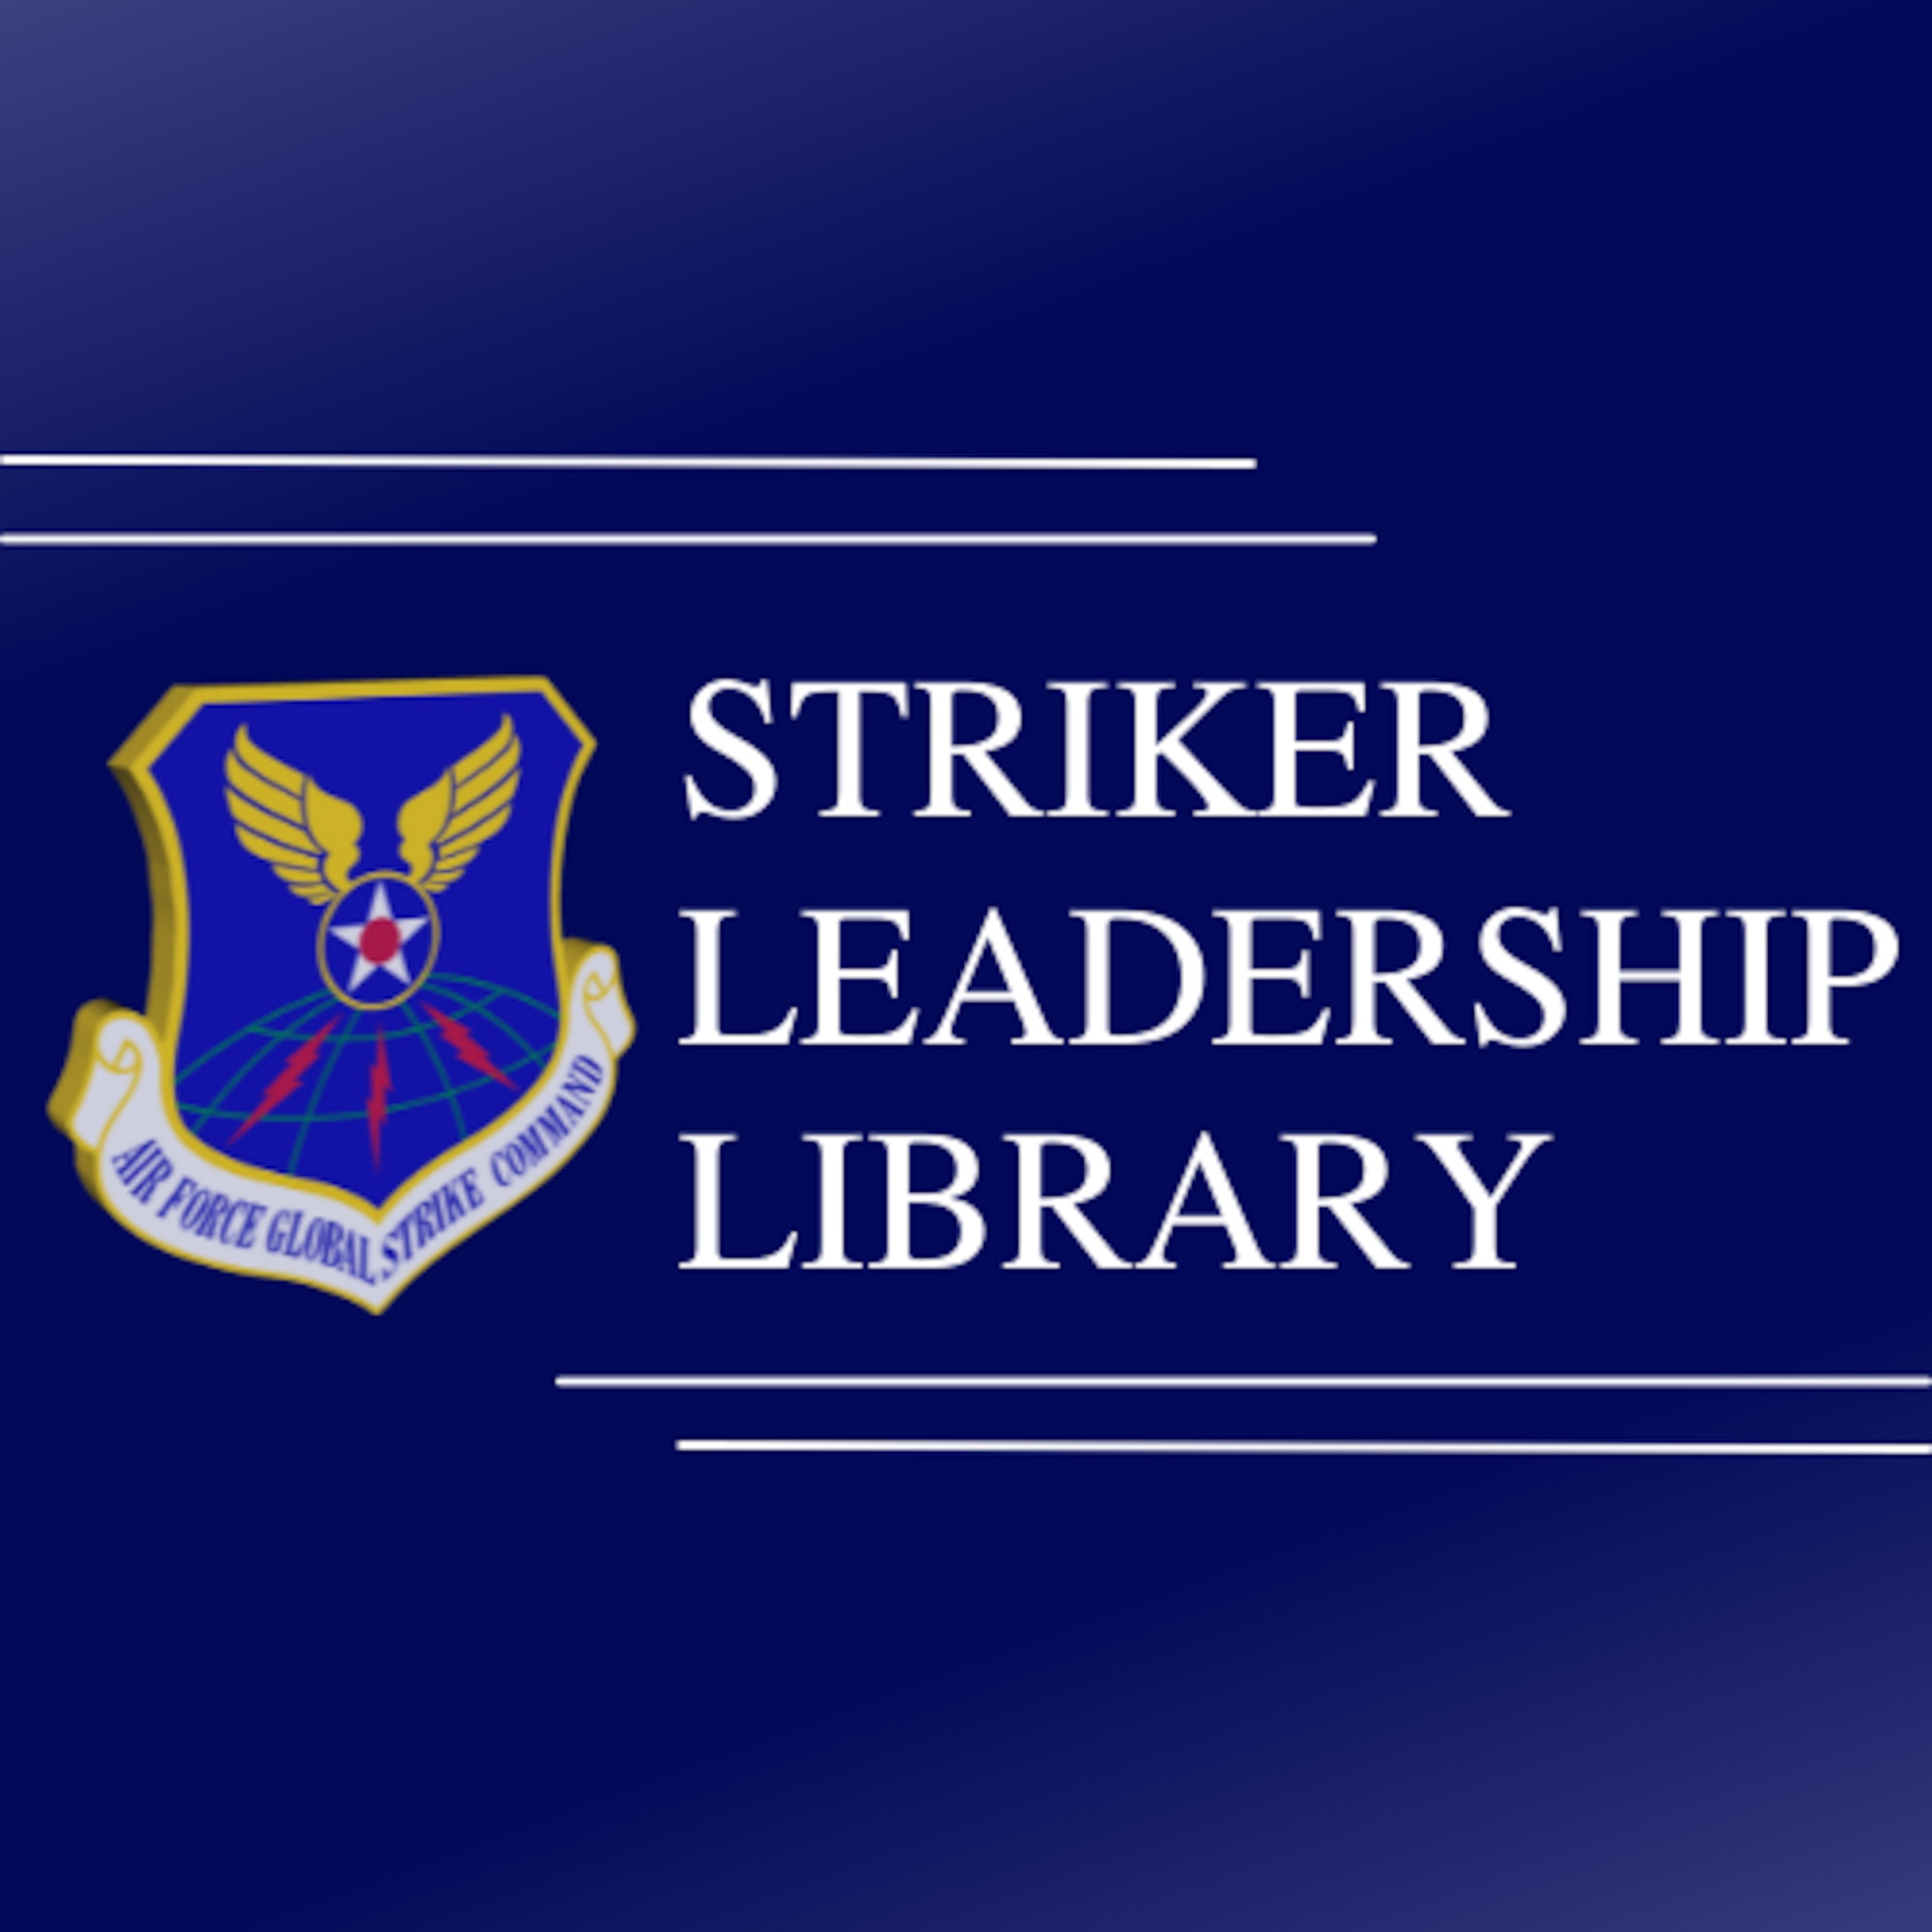 This graphic was designed as the header for Air Force Global Strike Command's Striker Leadership Library article updates.